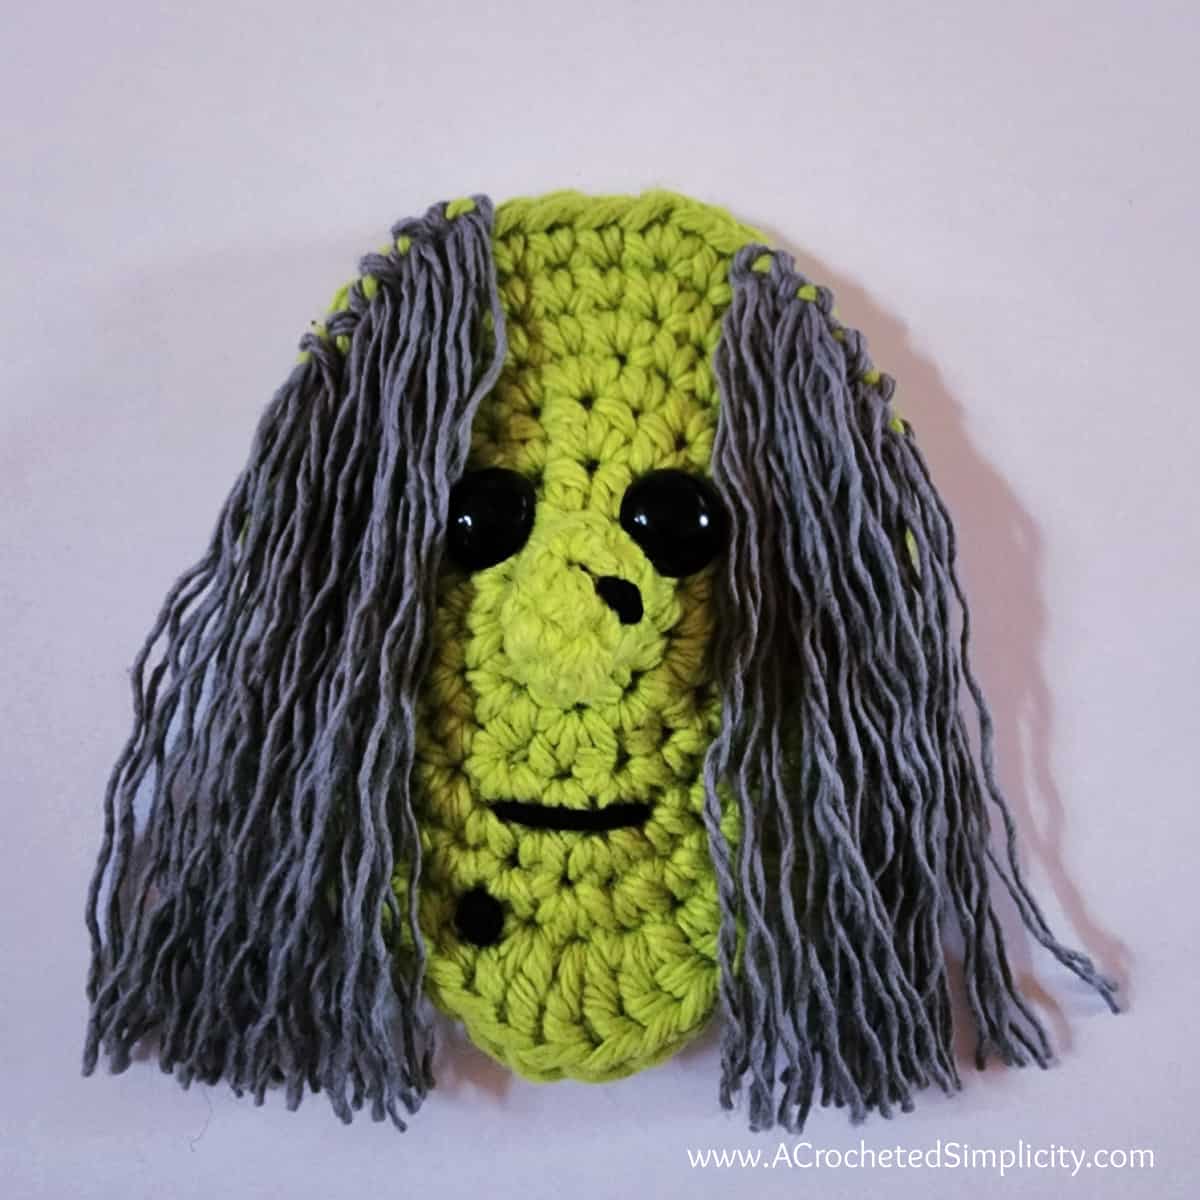 Crochet witch head finished with small smile and yarn wart on her chin.